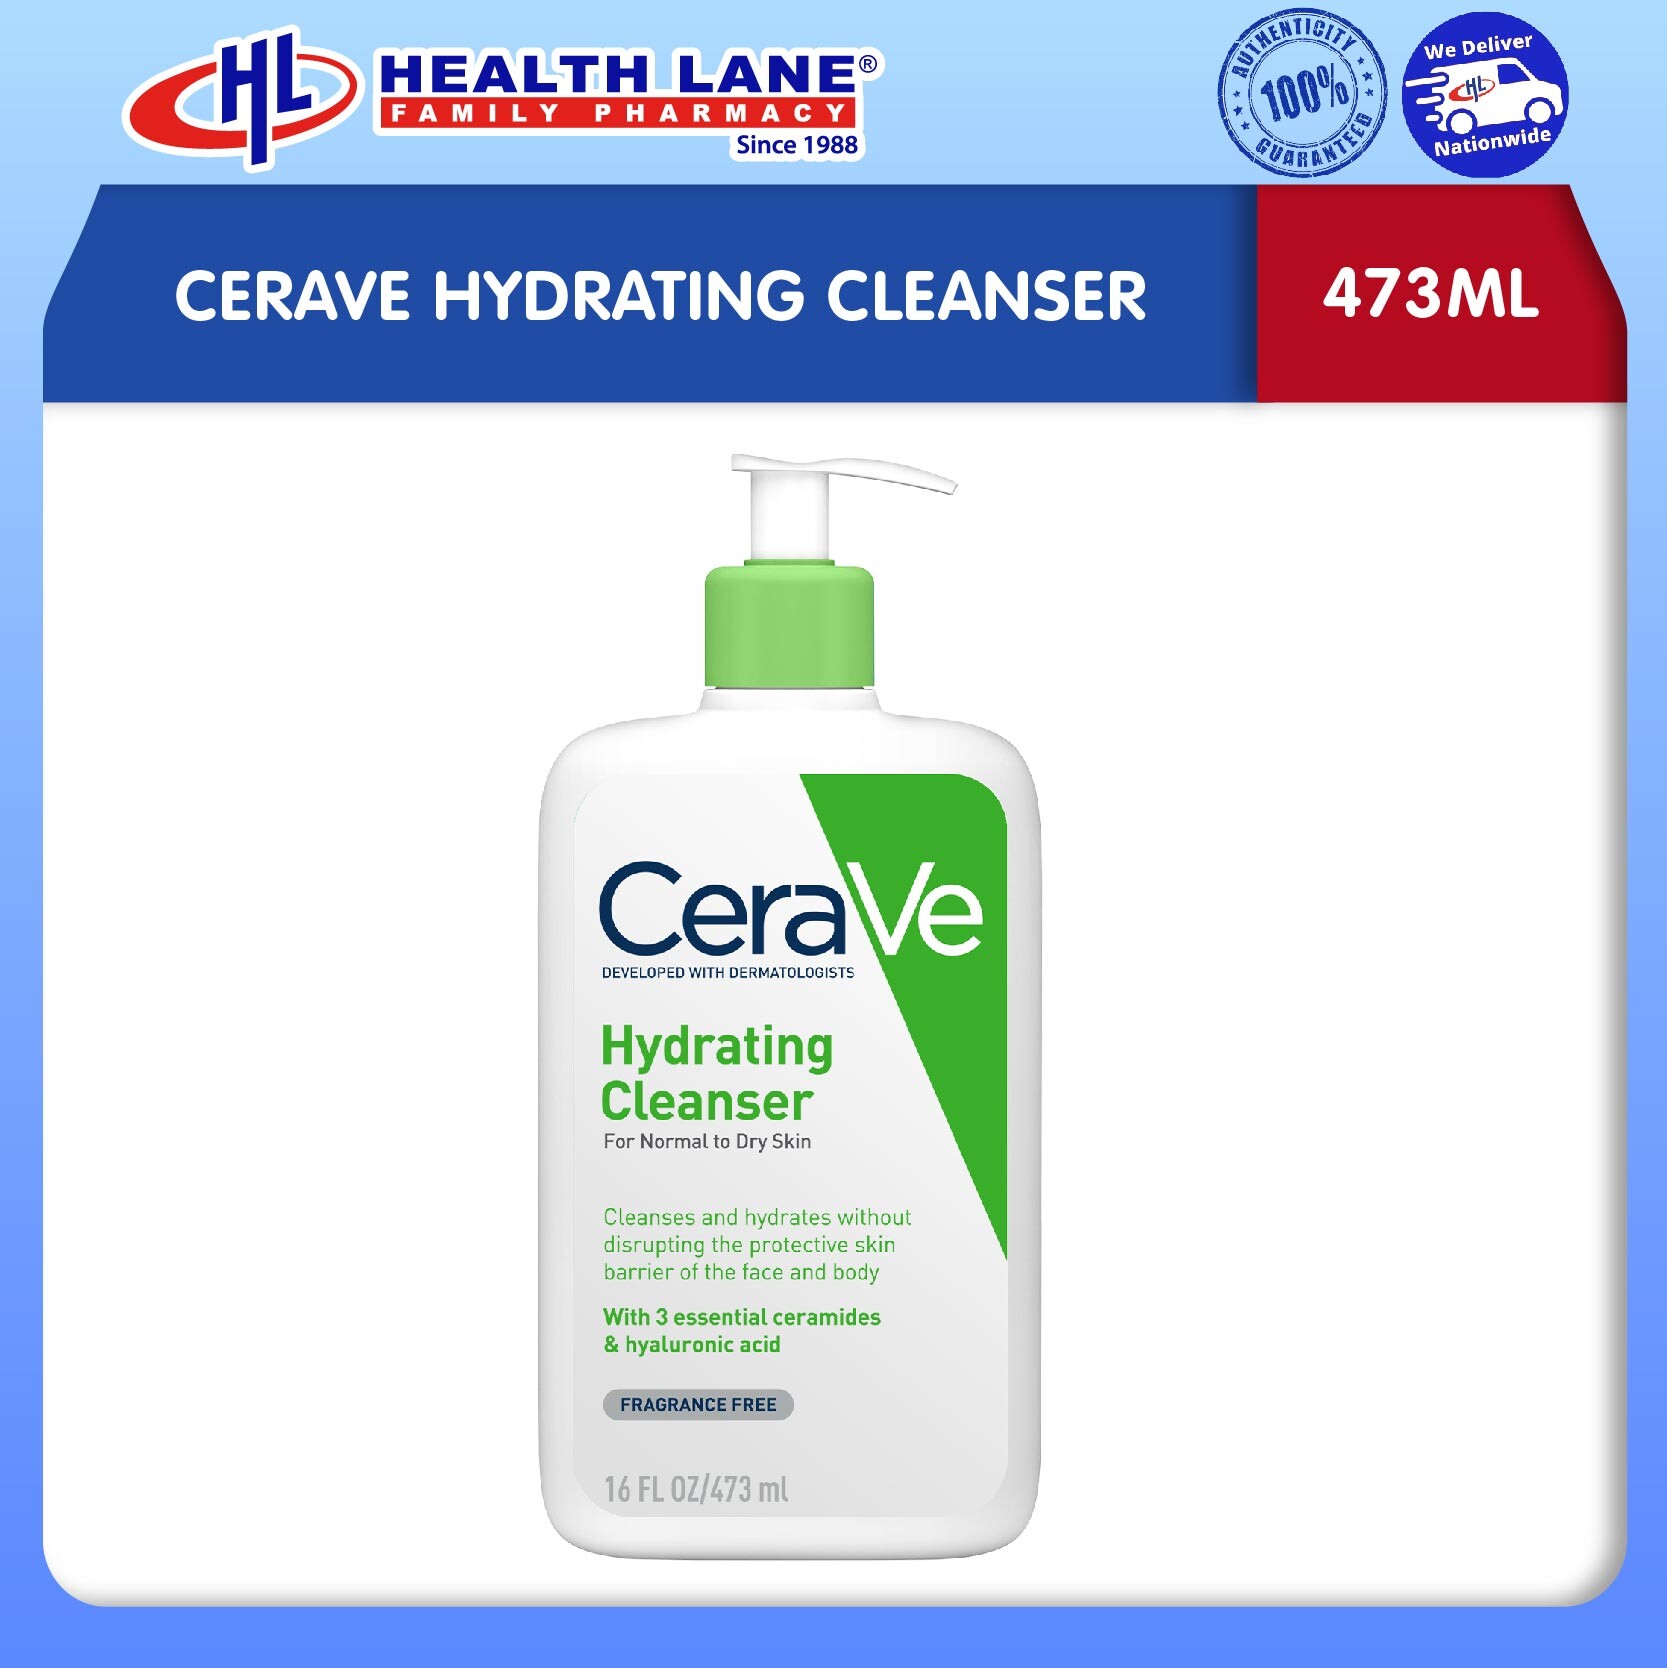 CERAVE HYDRATING CLEANSER (473ML)